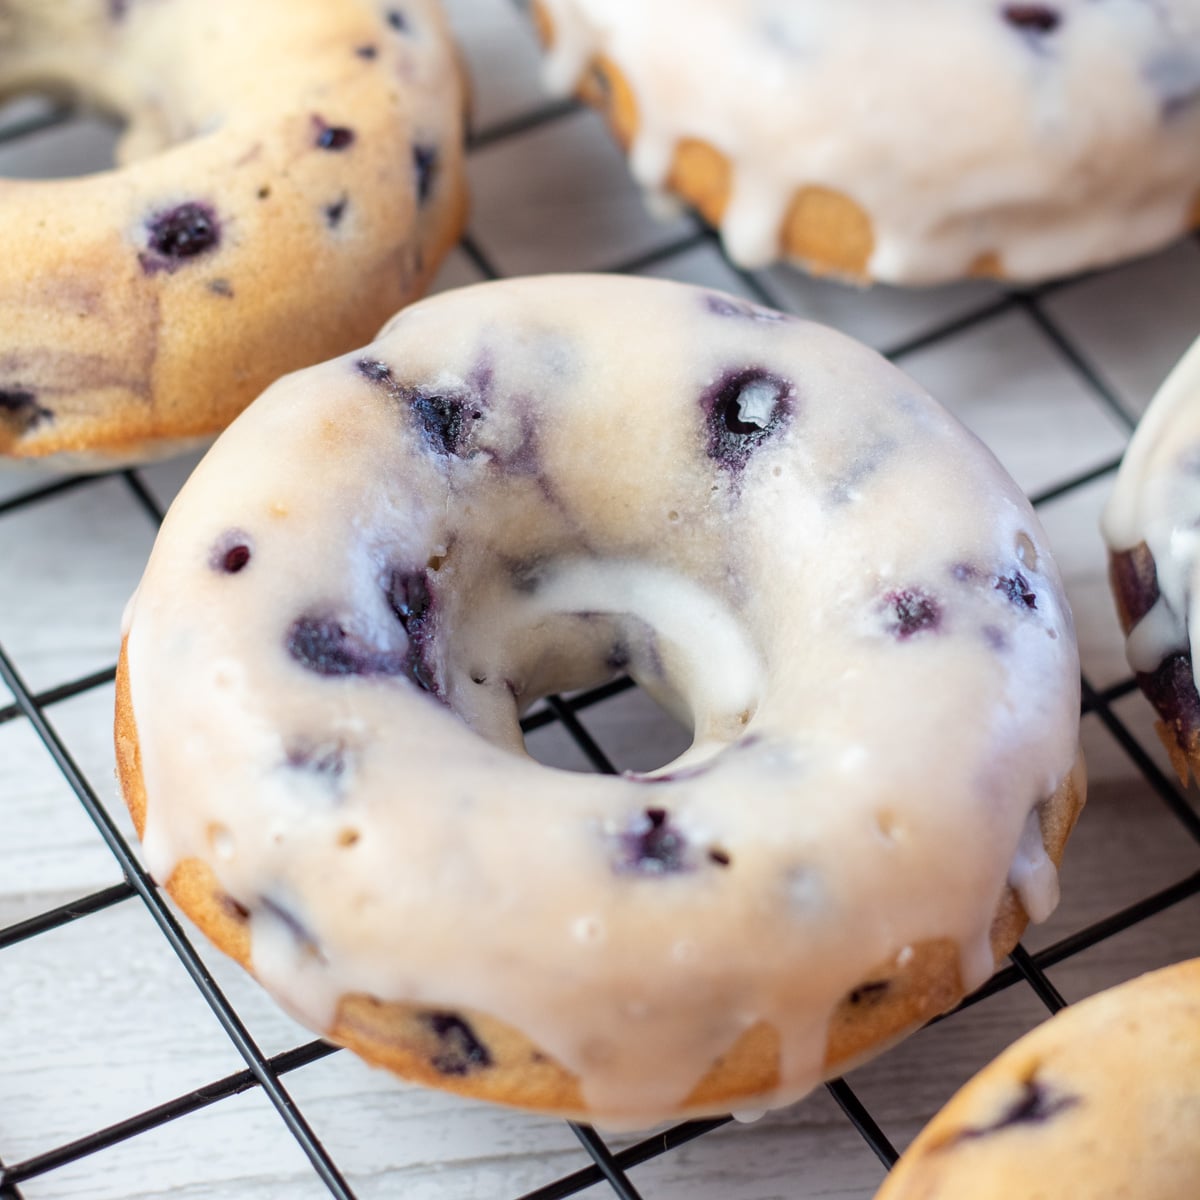 Square image of a baked blueberry donut.